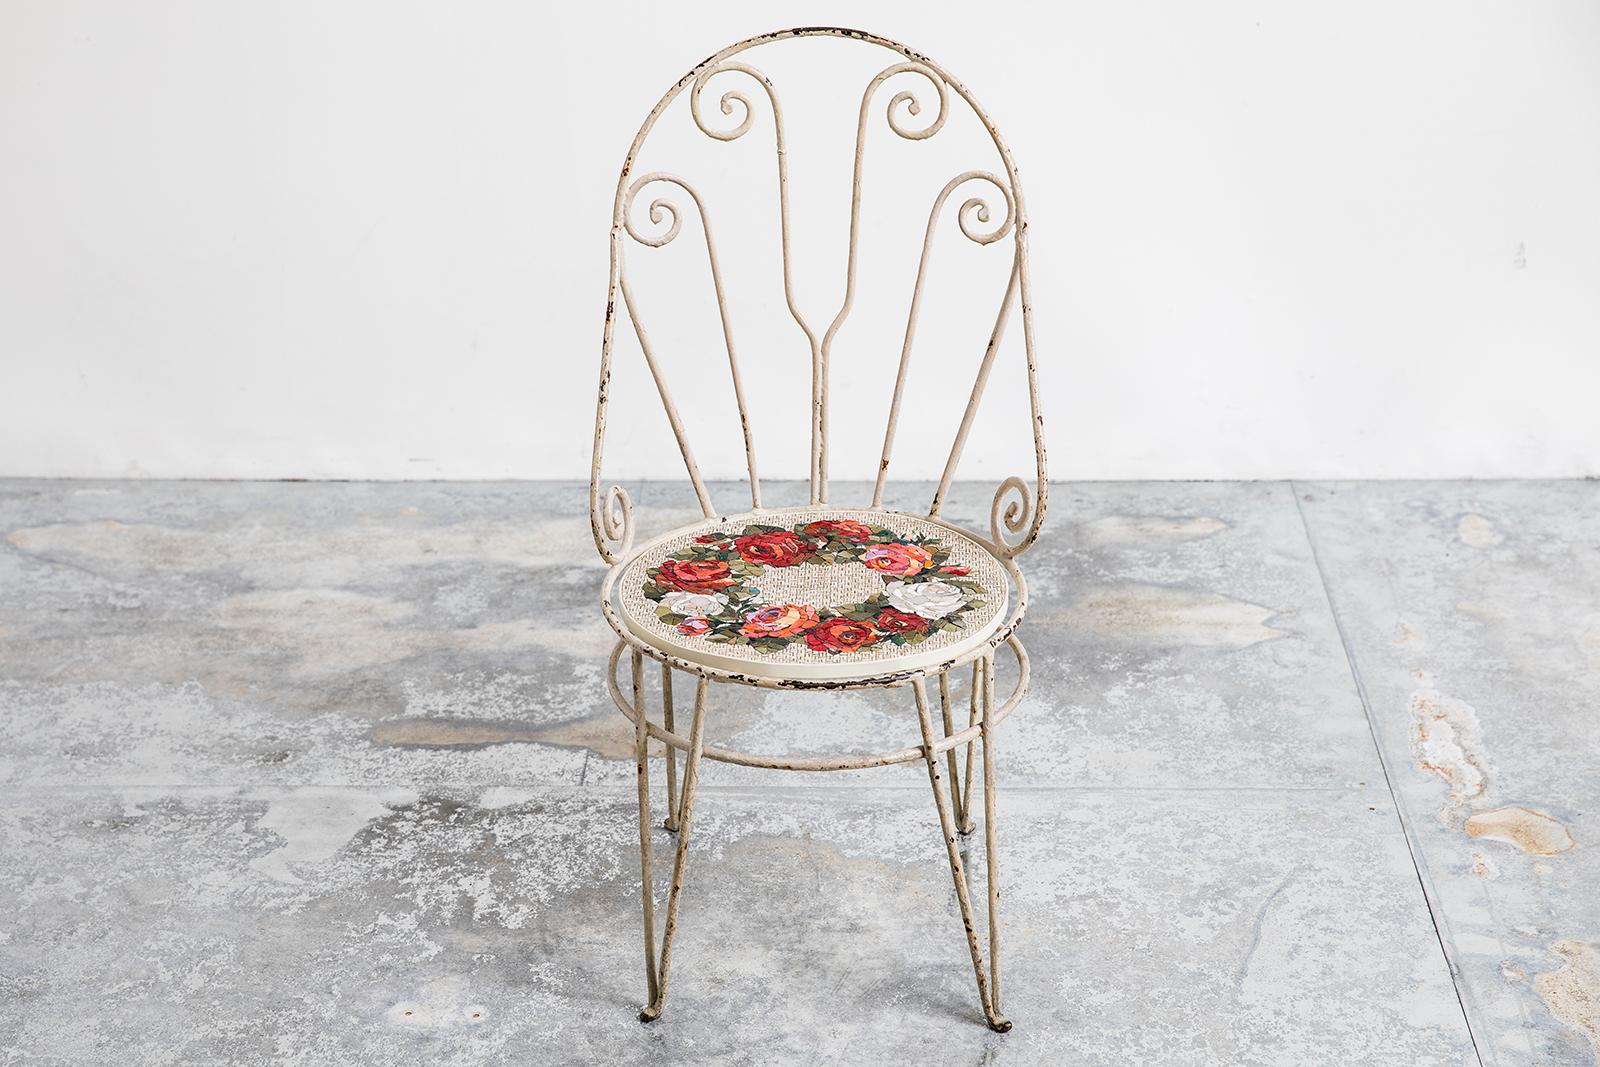 Sedia con Wreath Antique iron chair by Yukiko Nagai
Dimensions: D44 x W43 x H89 cm
Material: Marble, Natural stone, Venetian color glass, Cement, Stucco, Iron
Weight: 11 kg 

“Flower Patches